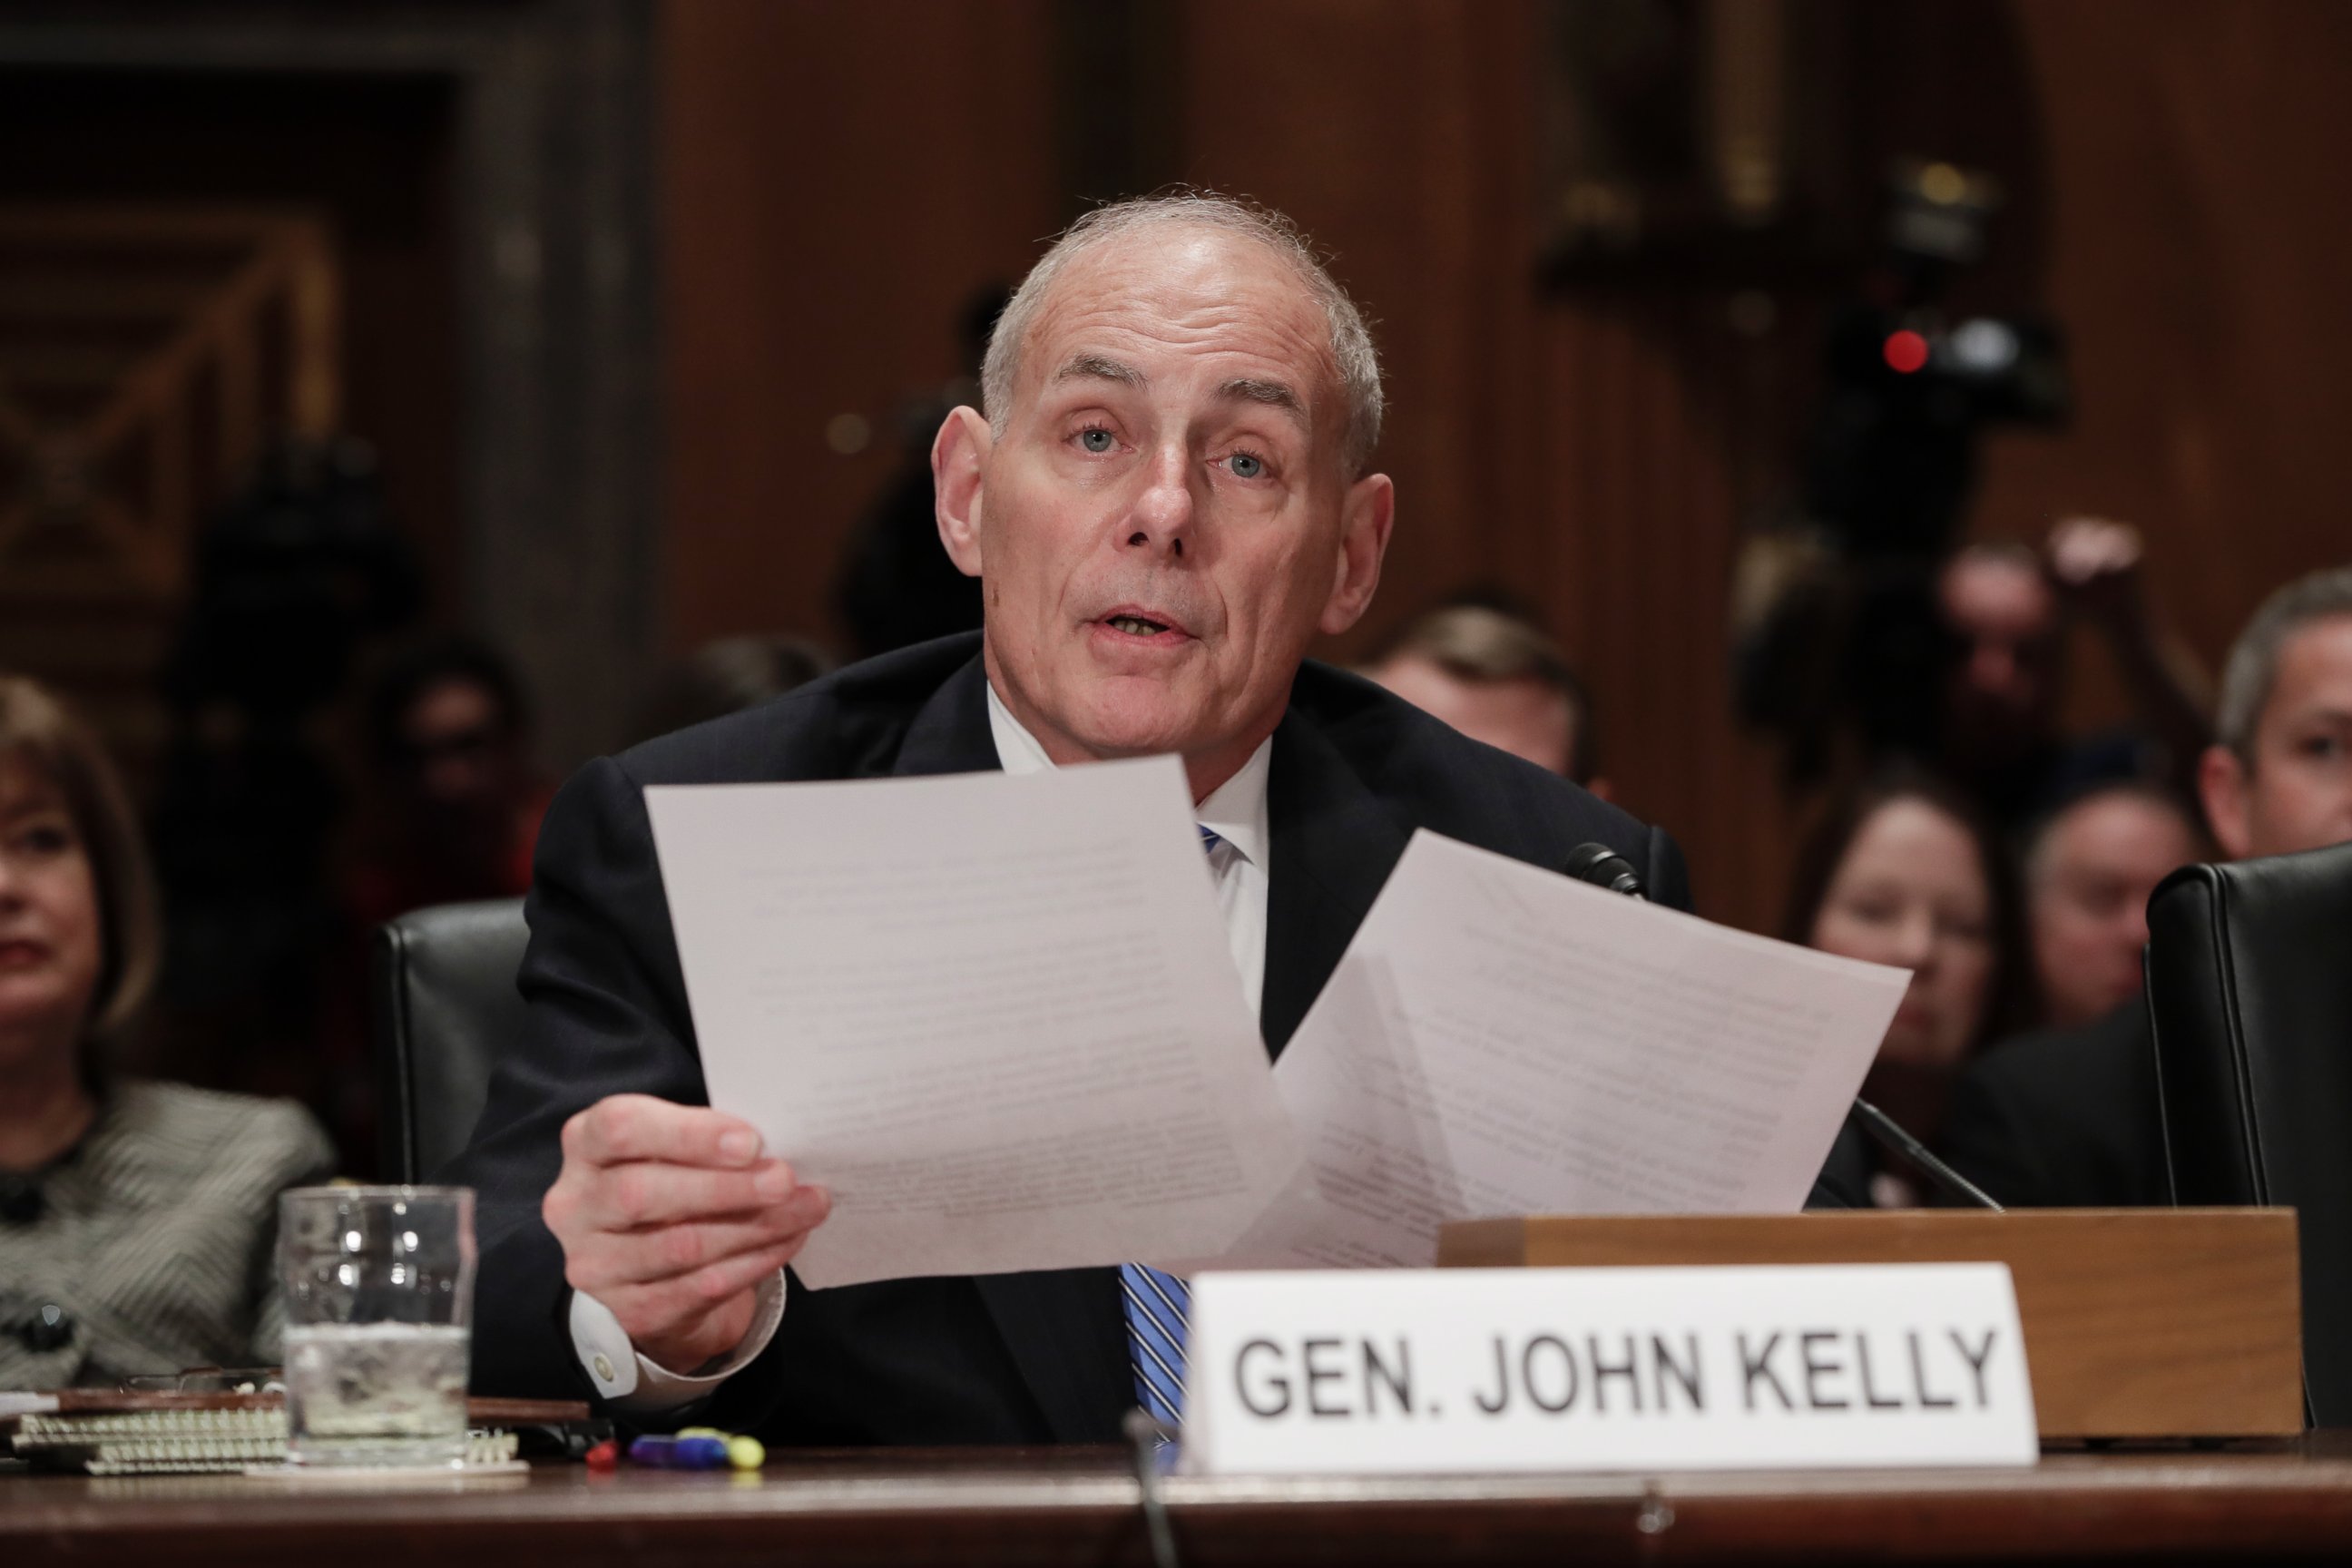 PHOTO: Homeland Security Secretary-designate John Kelly testifies on Capitol Hill in Washington, D.C. Jan. 10, 2017, at his confirmation hearing before the Senate Homeland Security and Governmental Affairs Committee.